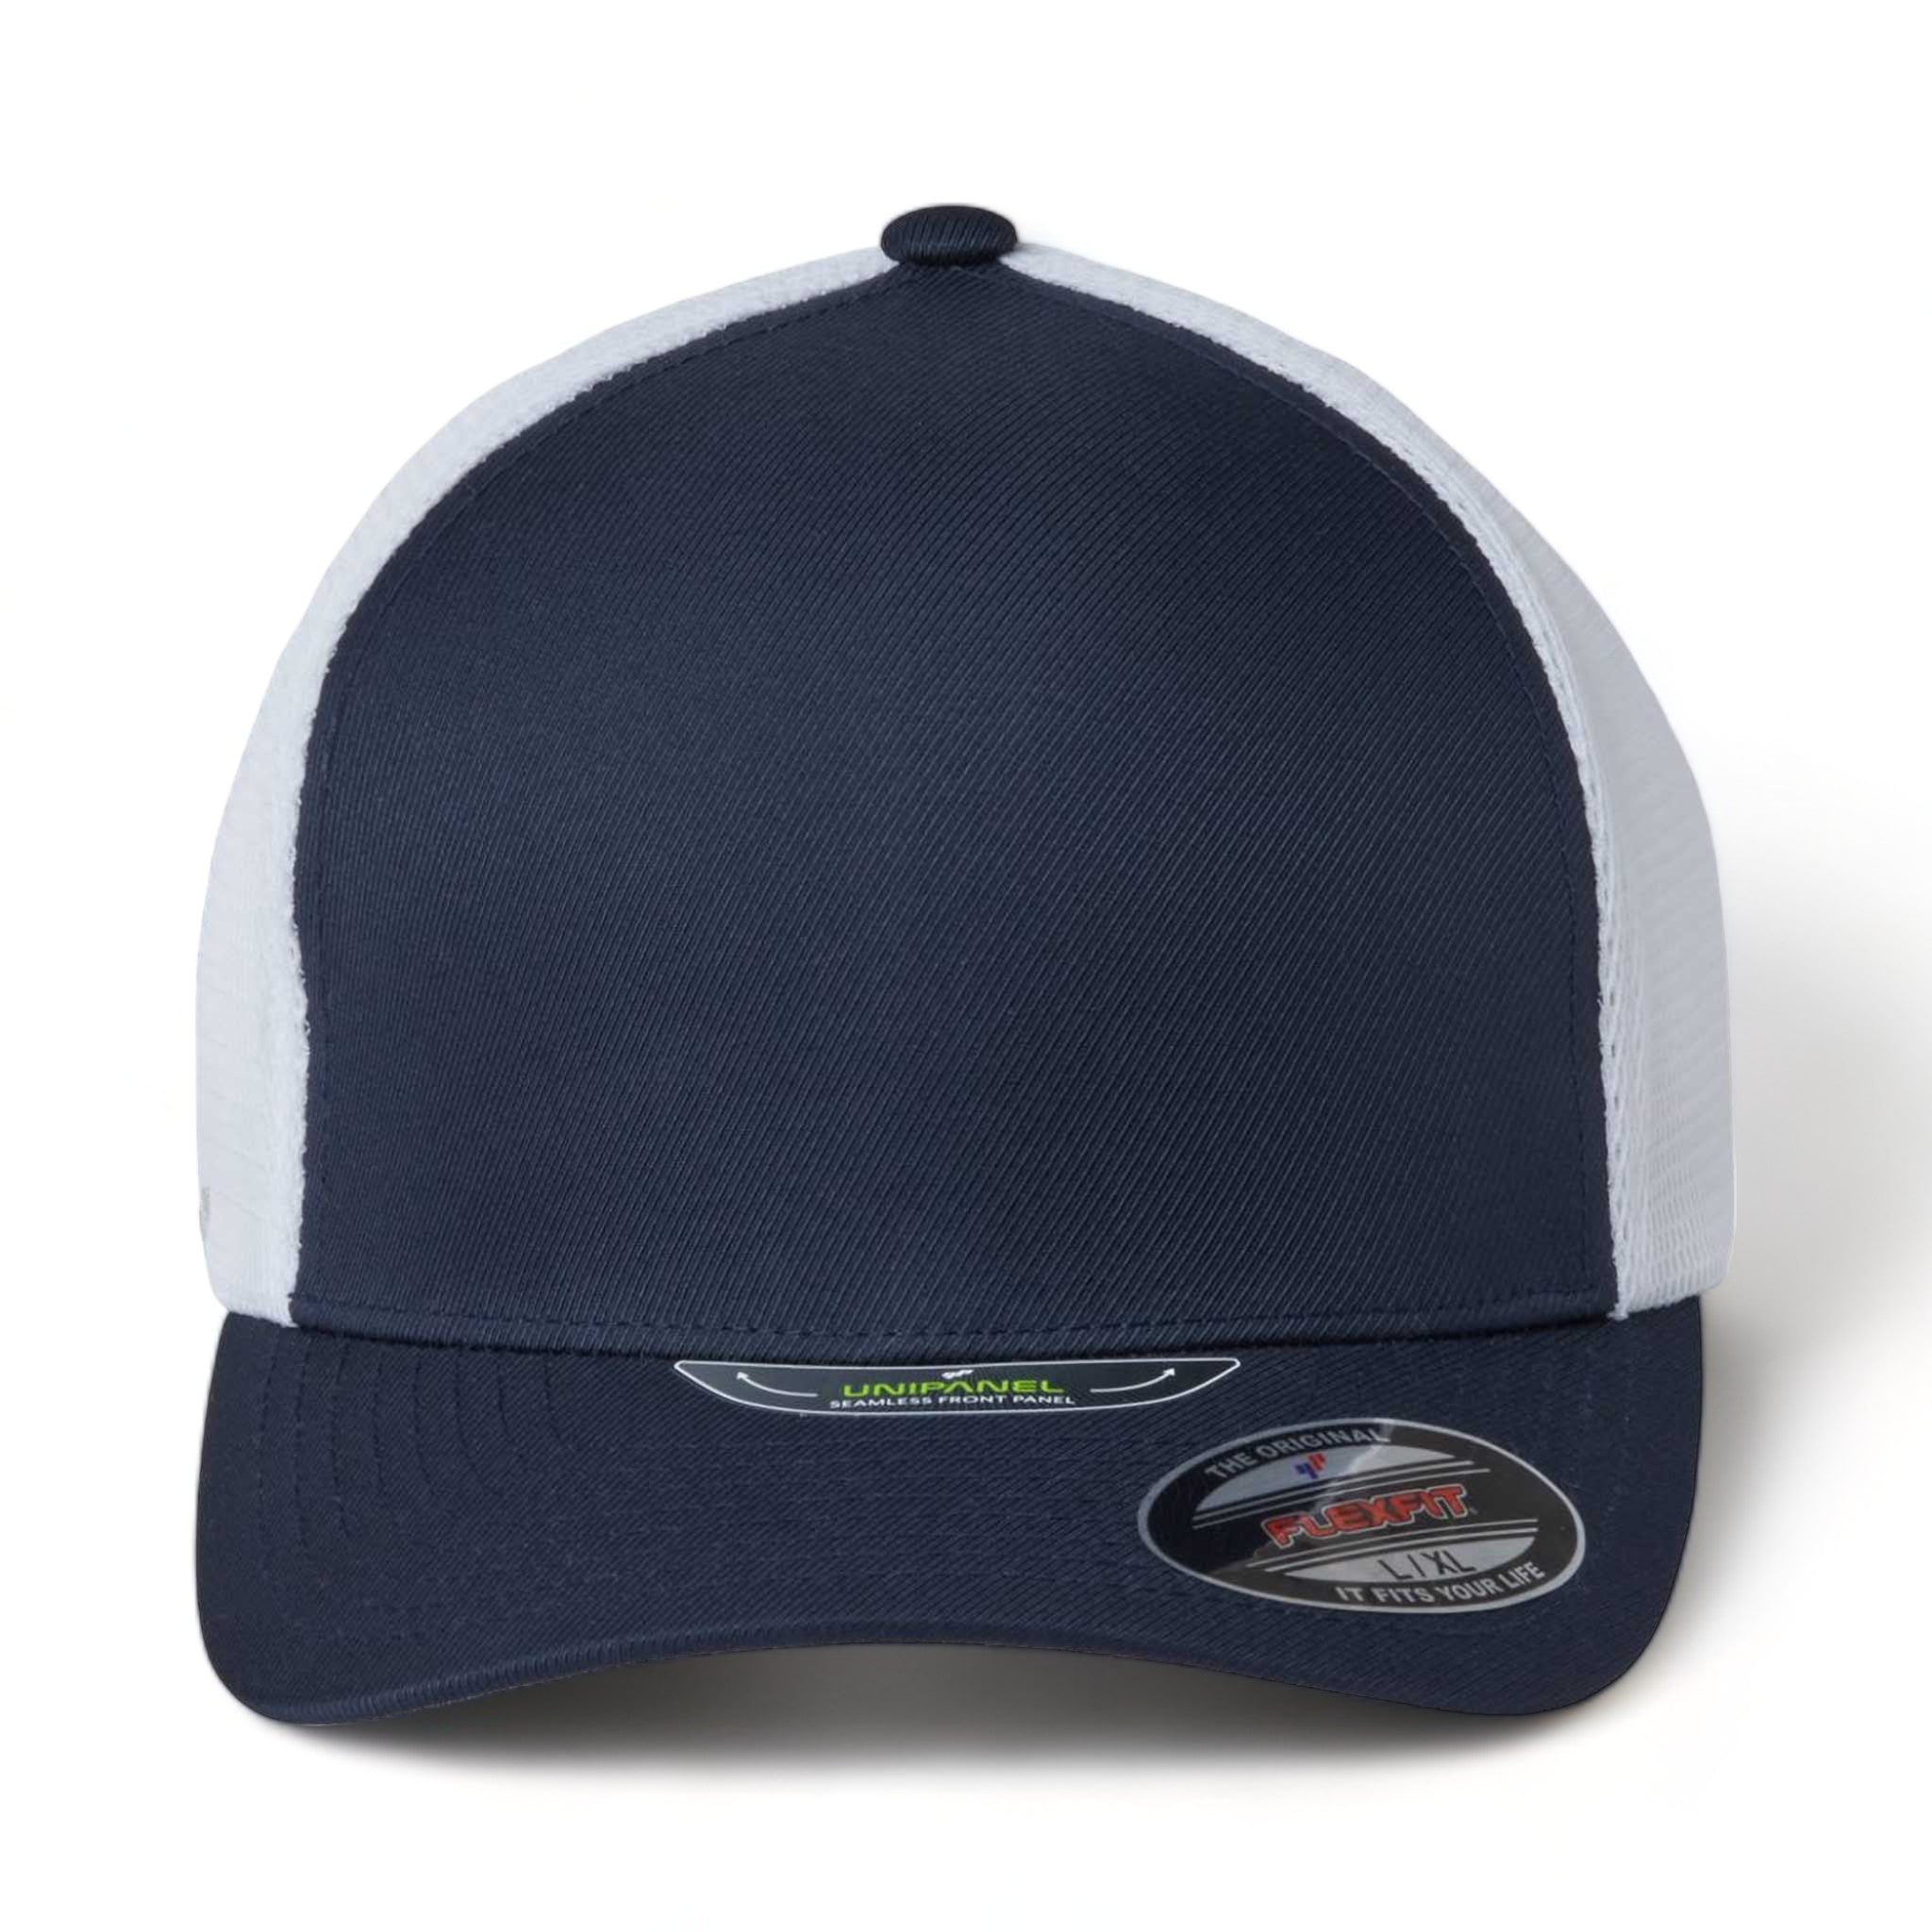 Front view of Flexfit 5511UP custom hat in true navy and white